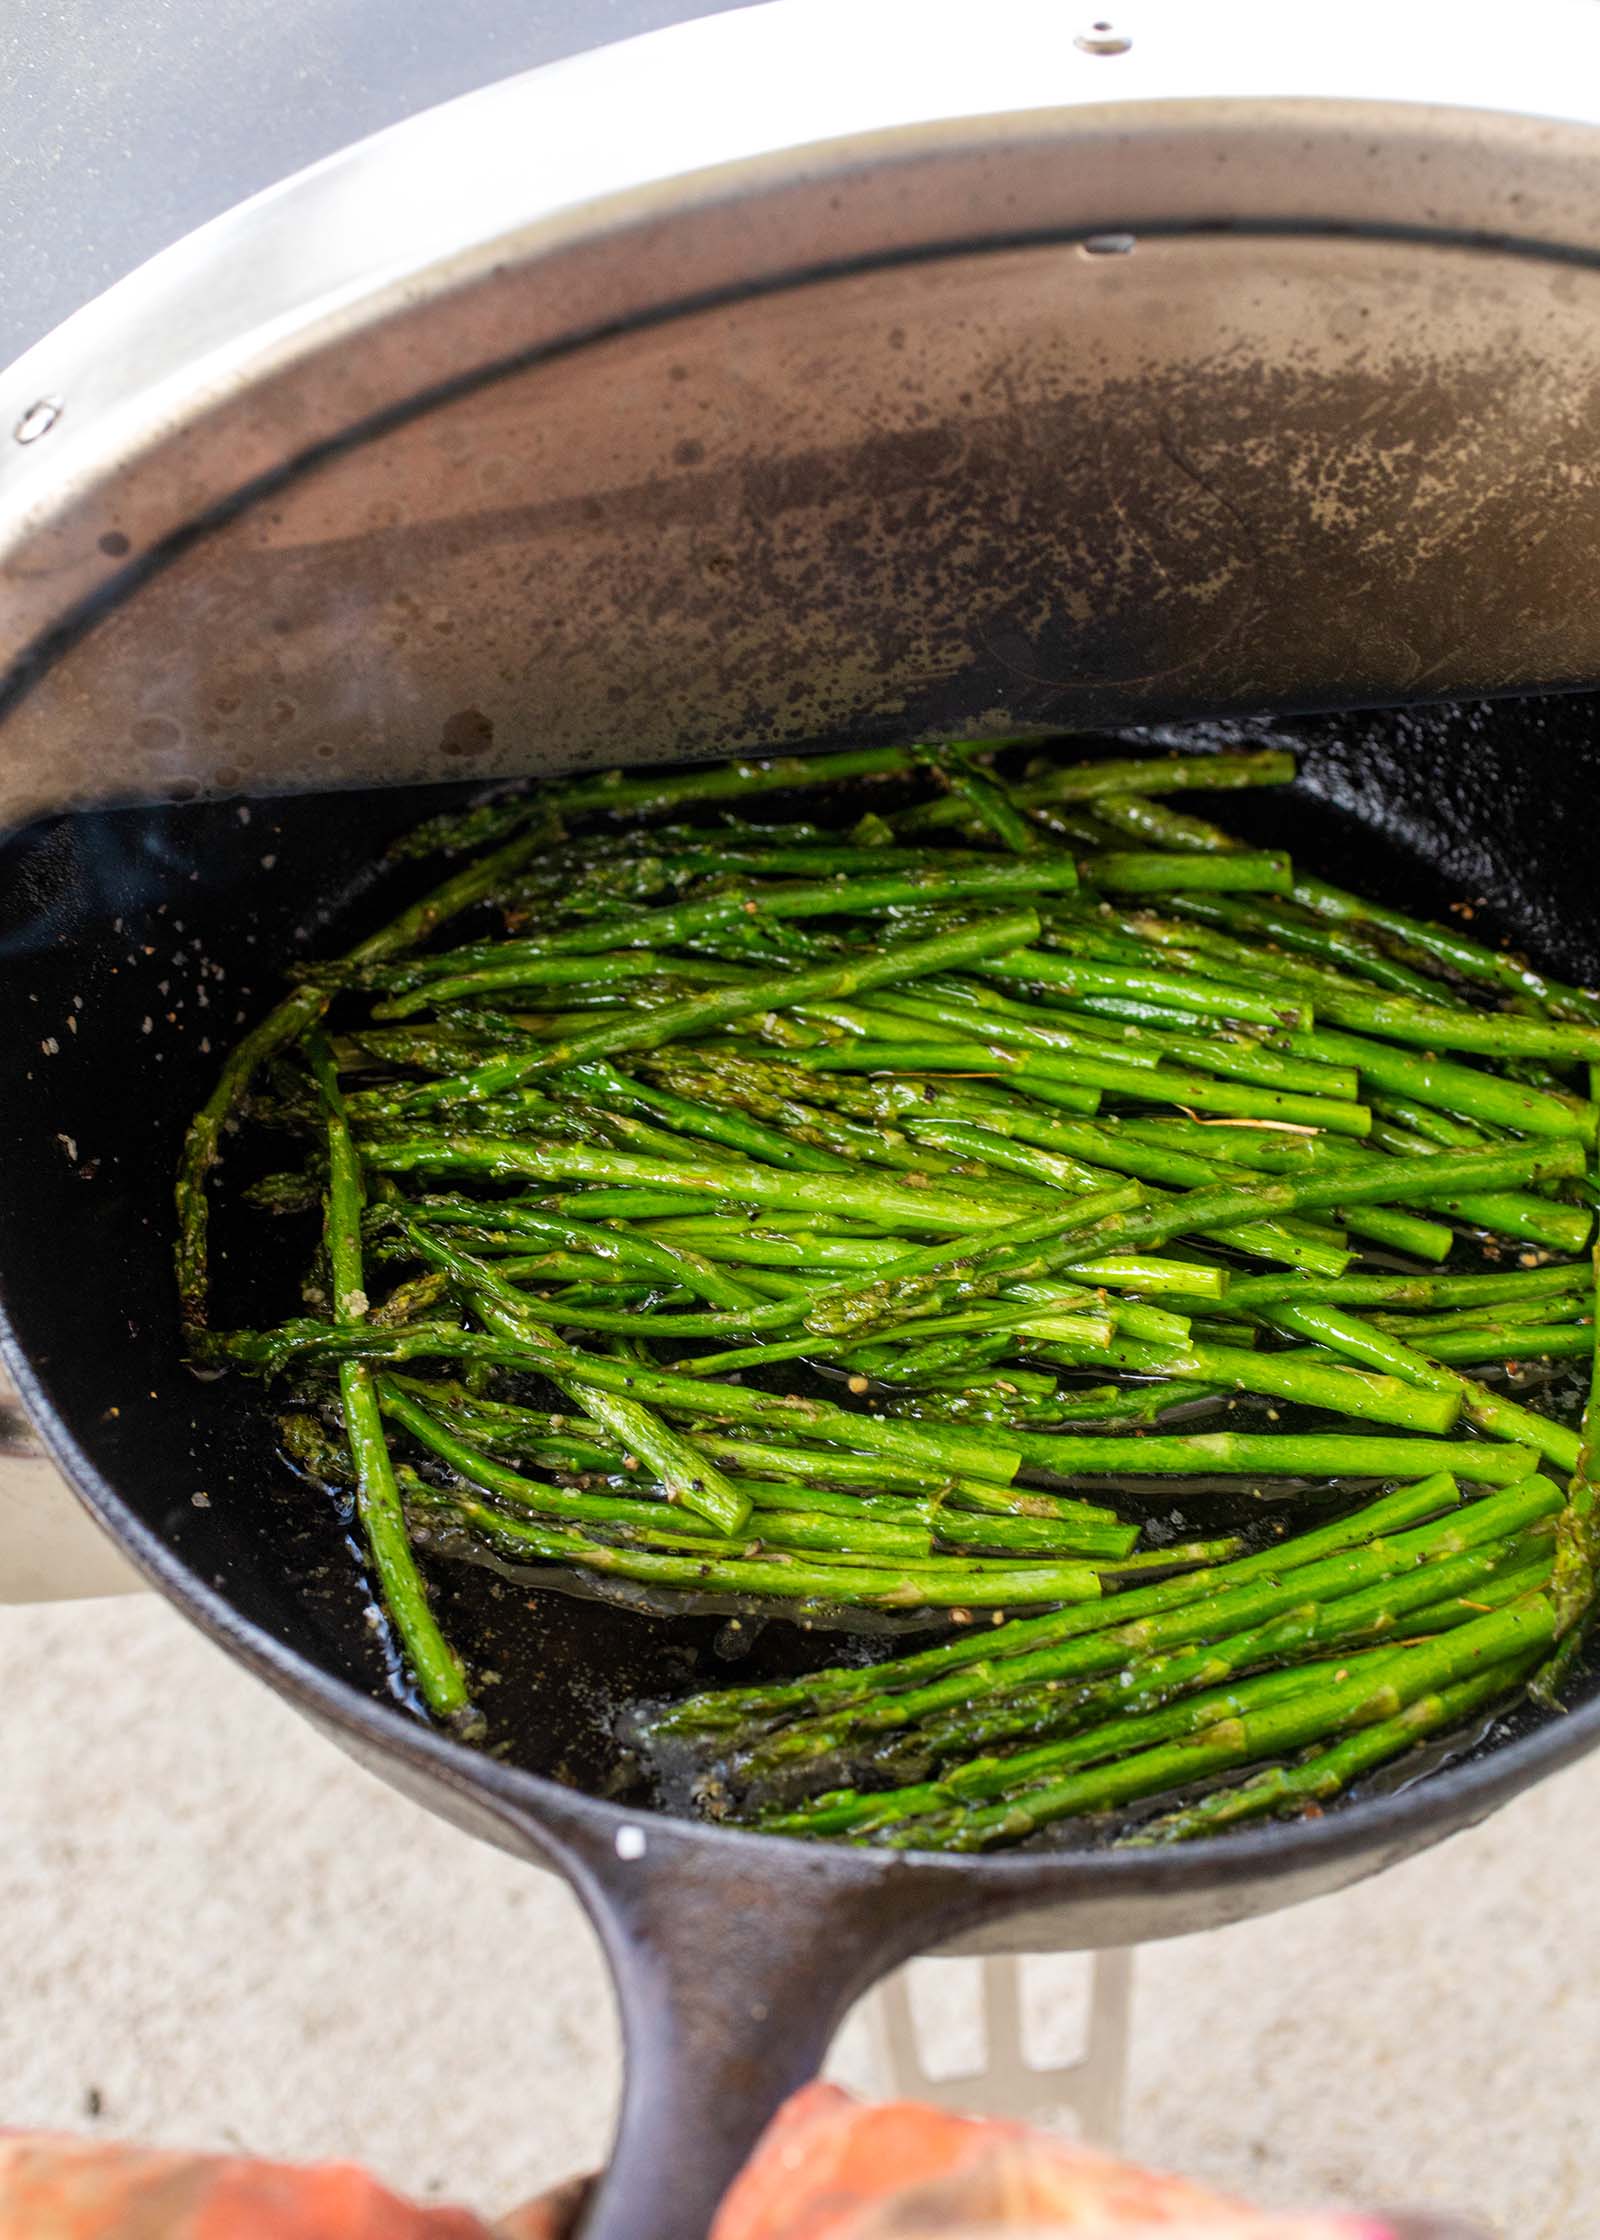 Cast iron skillet with asparagus being cooked inside a roccbox.